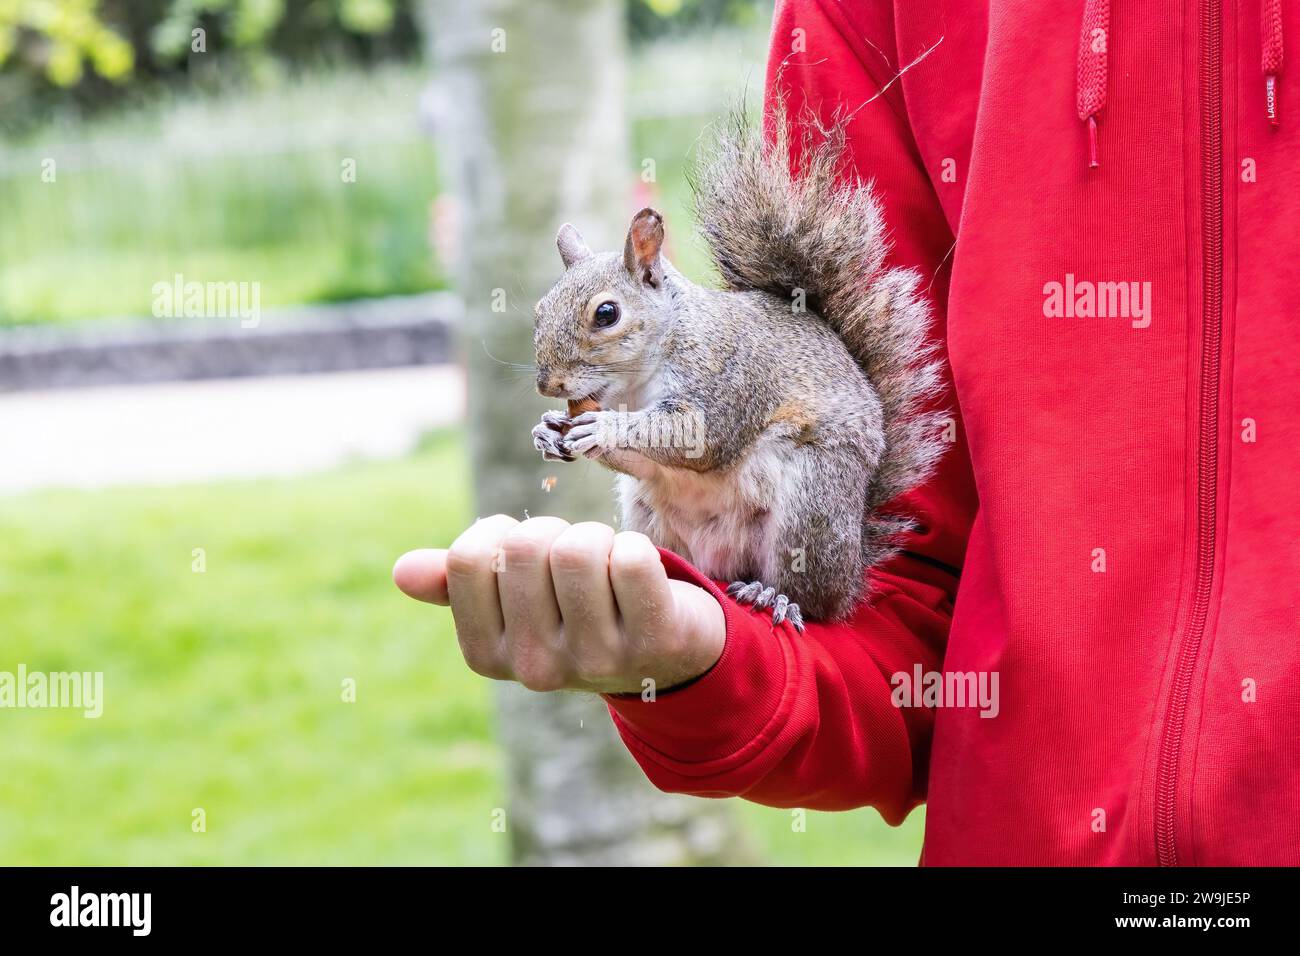 A Grey Squirrel (Sciurus carolinensis) eating a peanut in the hand of a tourist Stock Photo